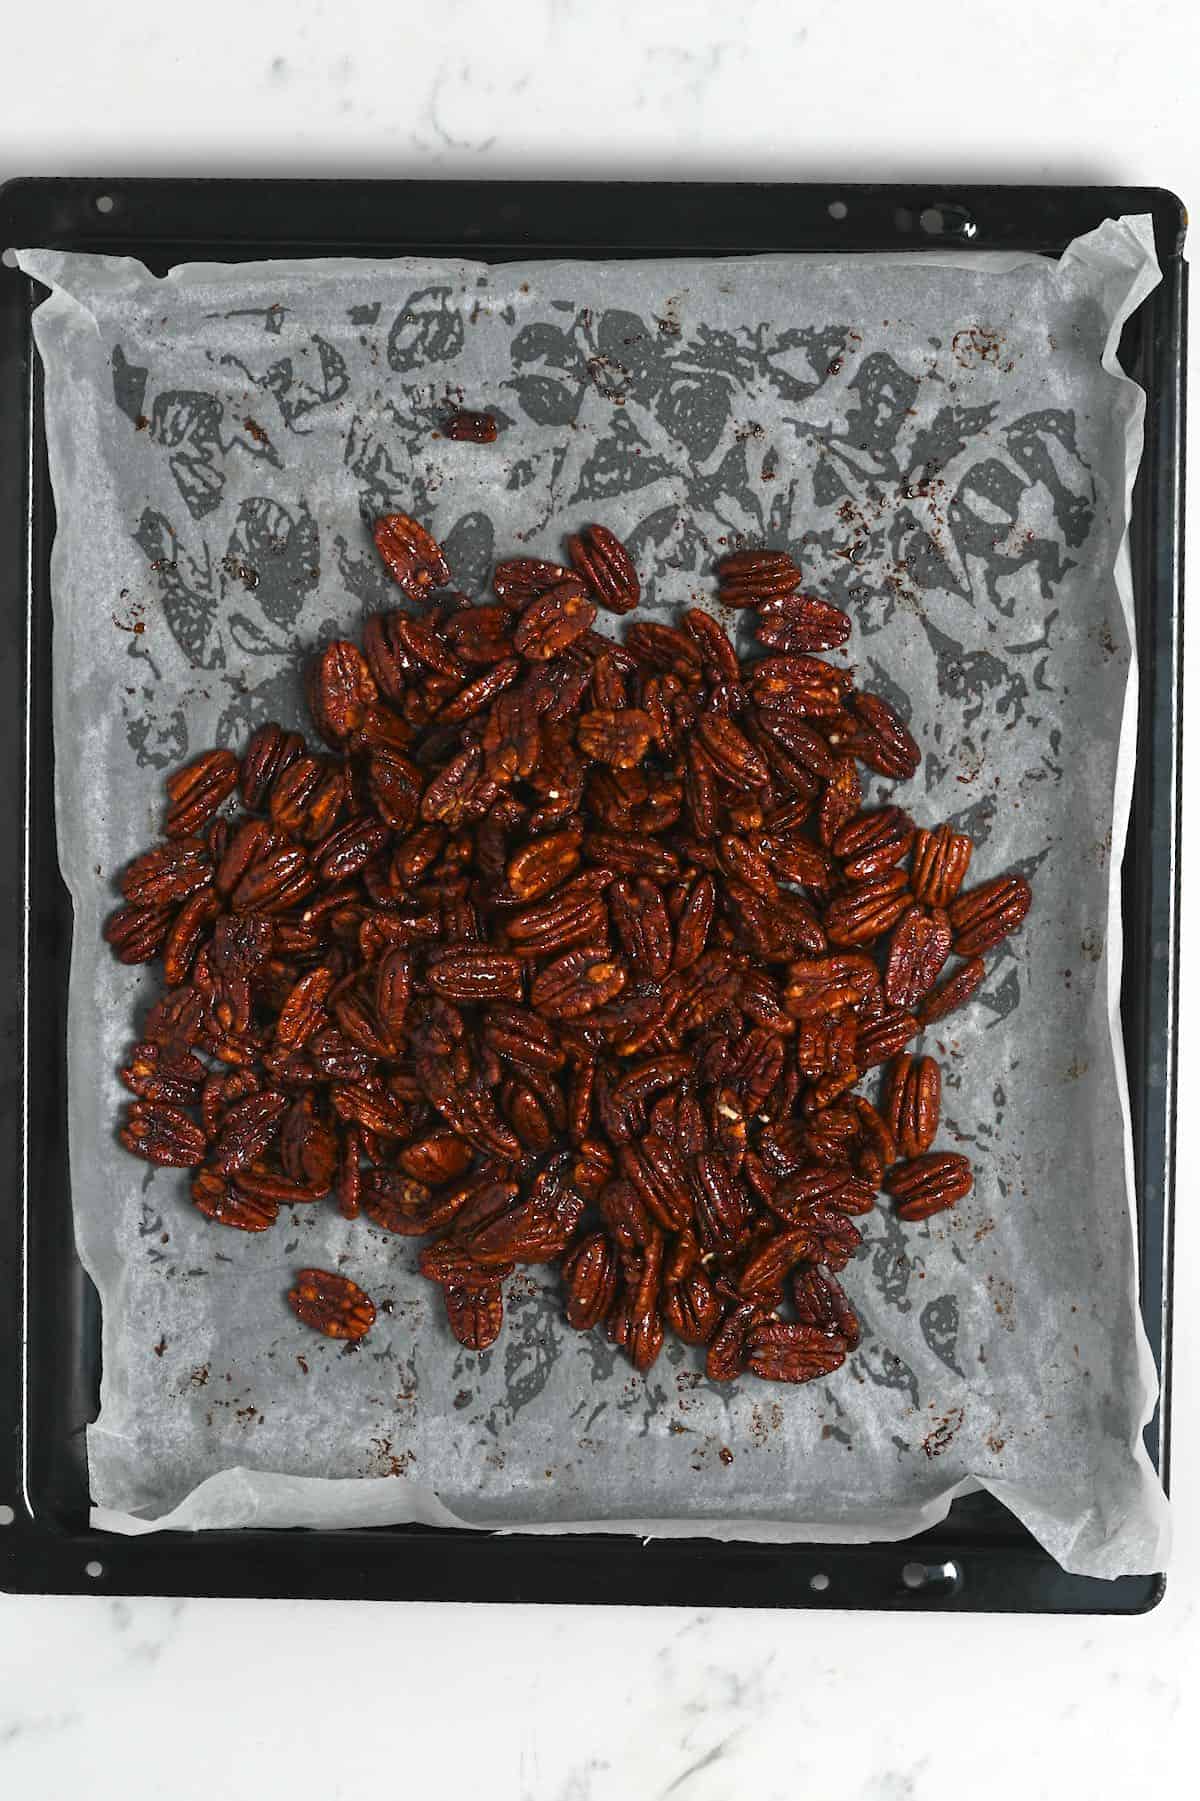 Candied pecans on a baking tray